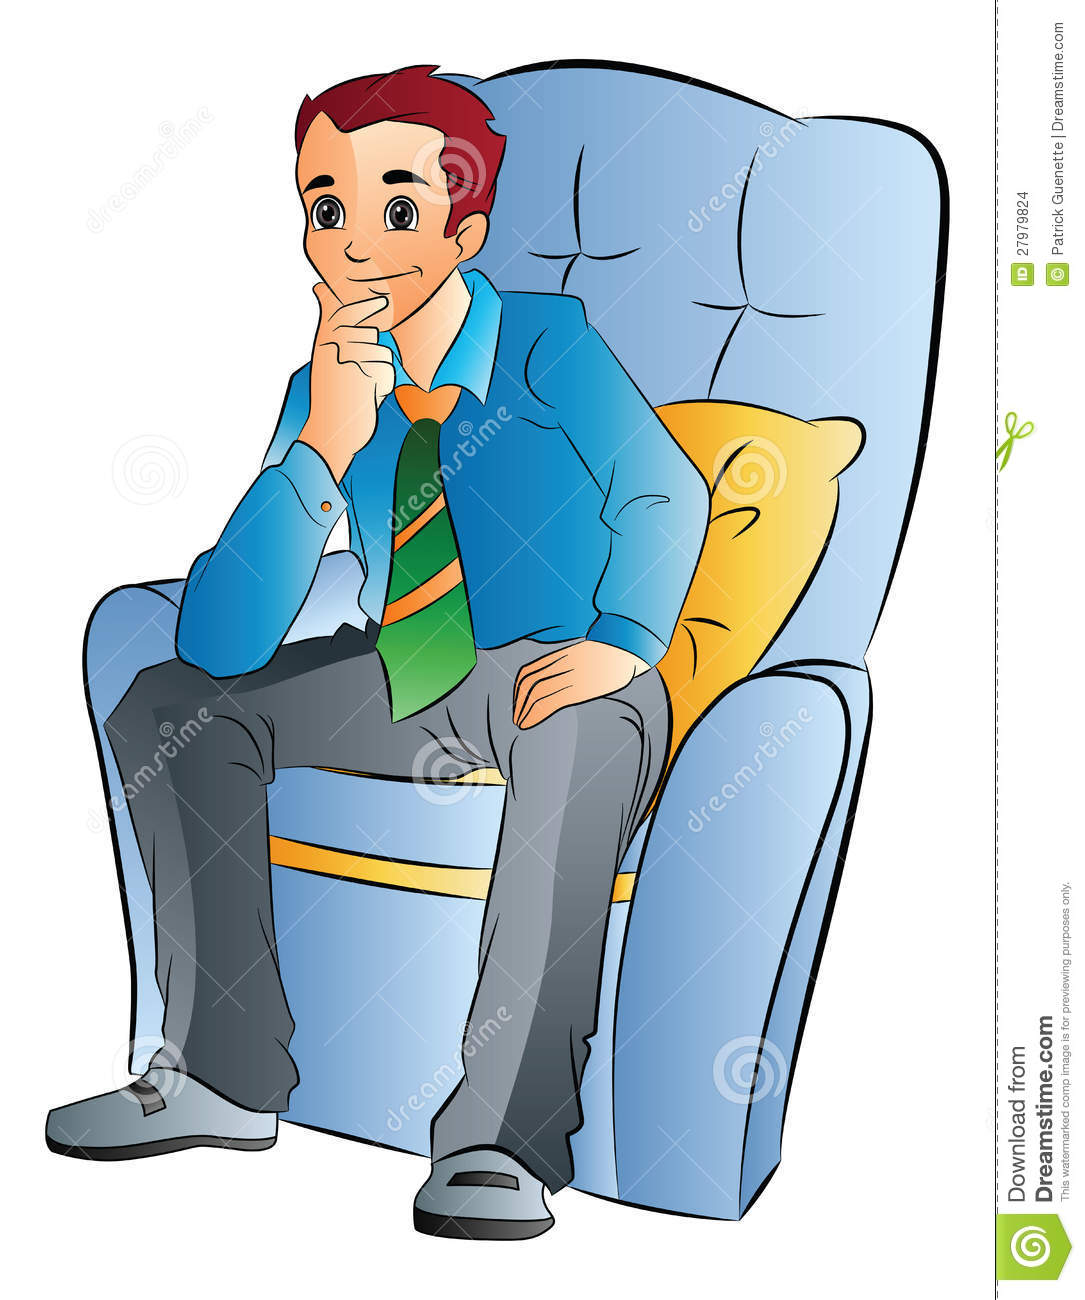 Man Sitting On A Soft Chair Illustration Stock Images   Image